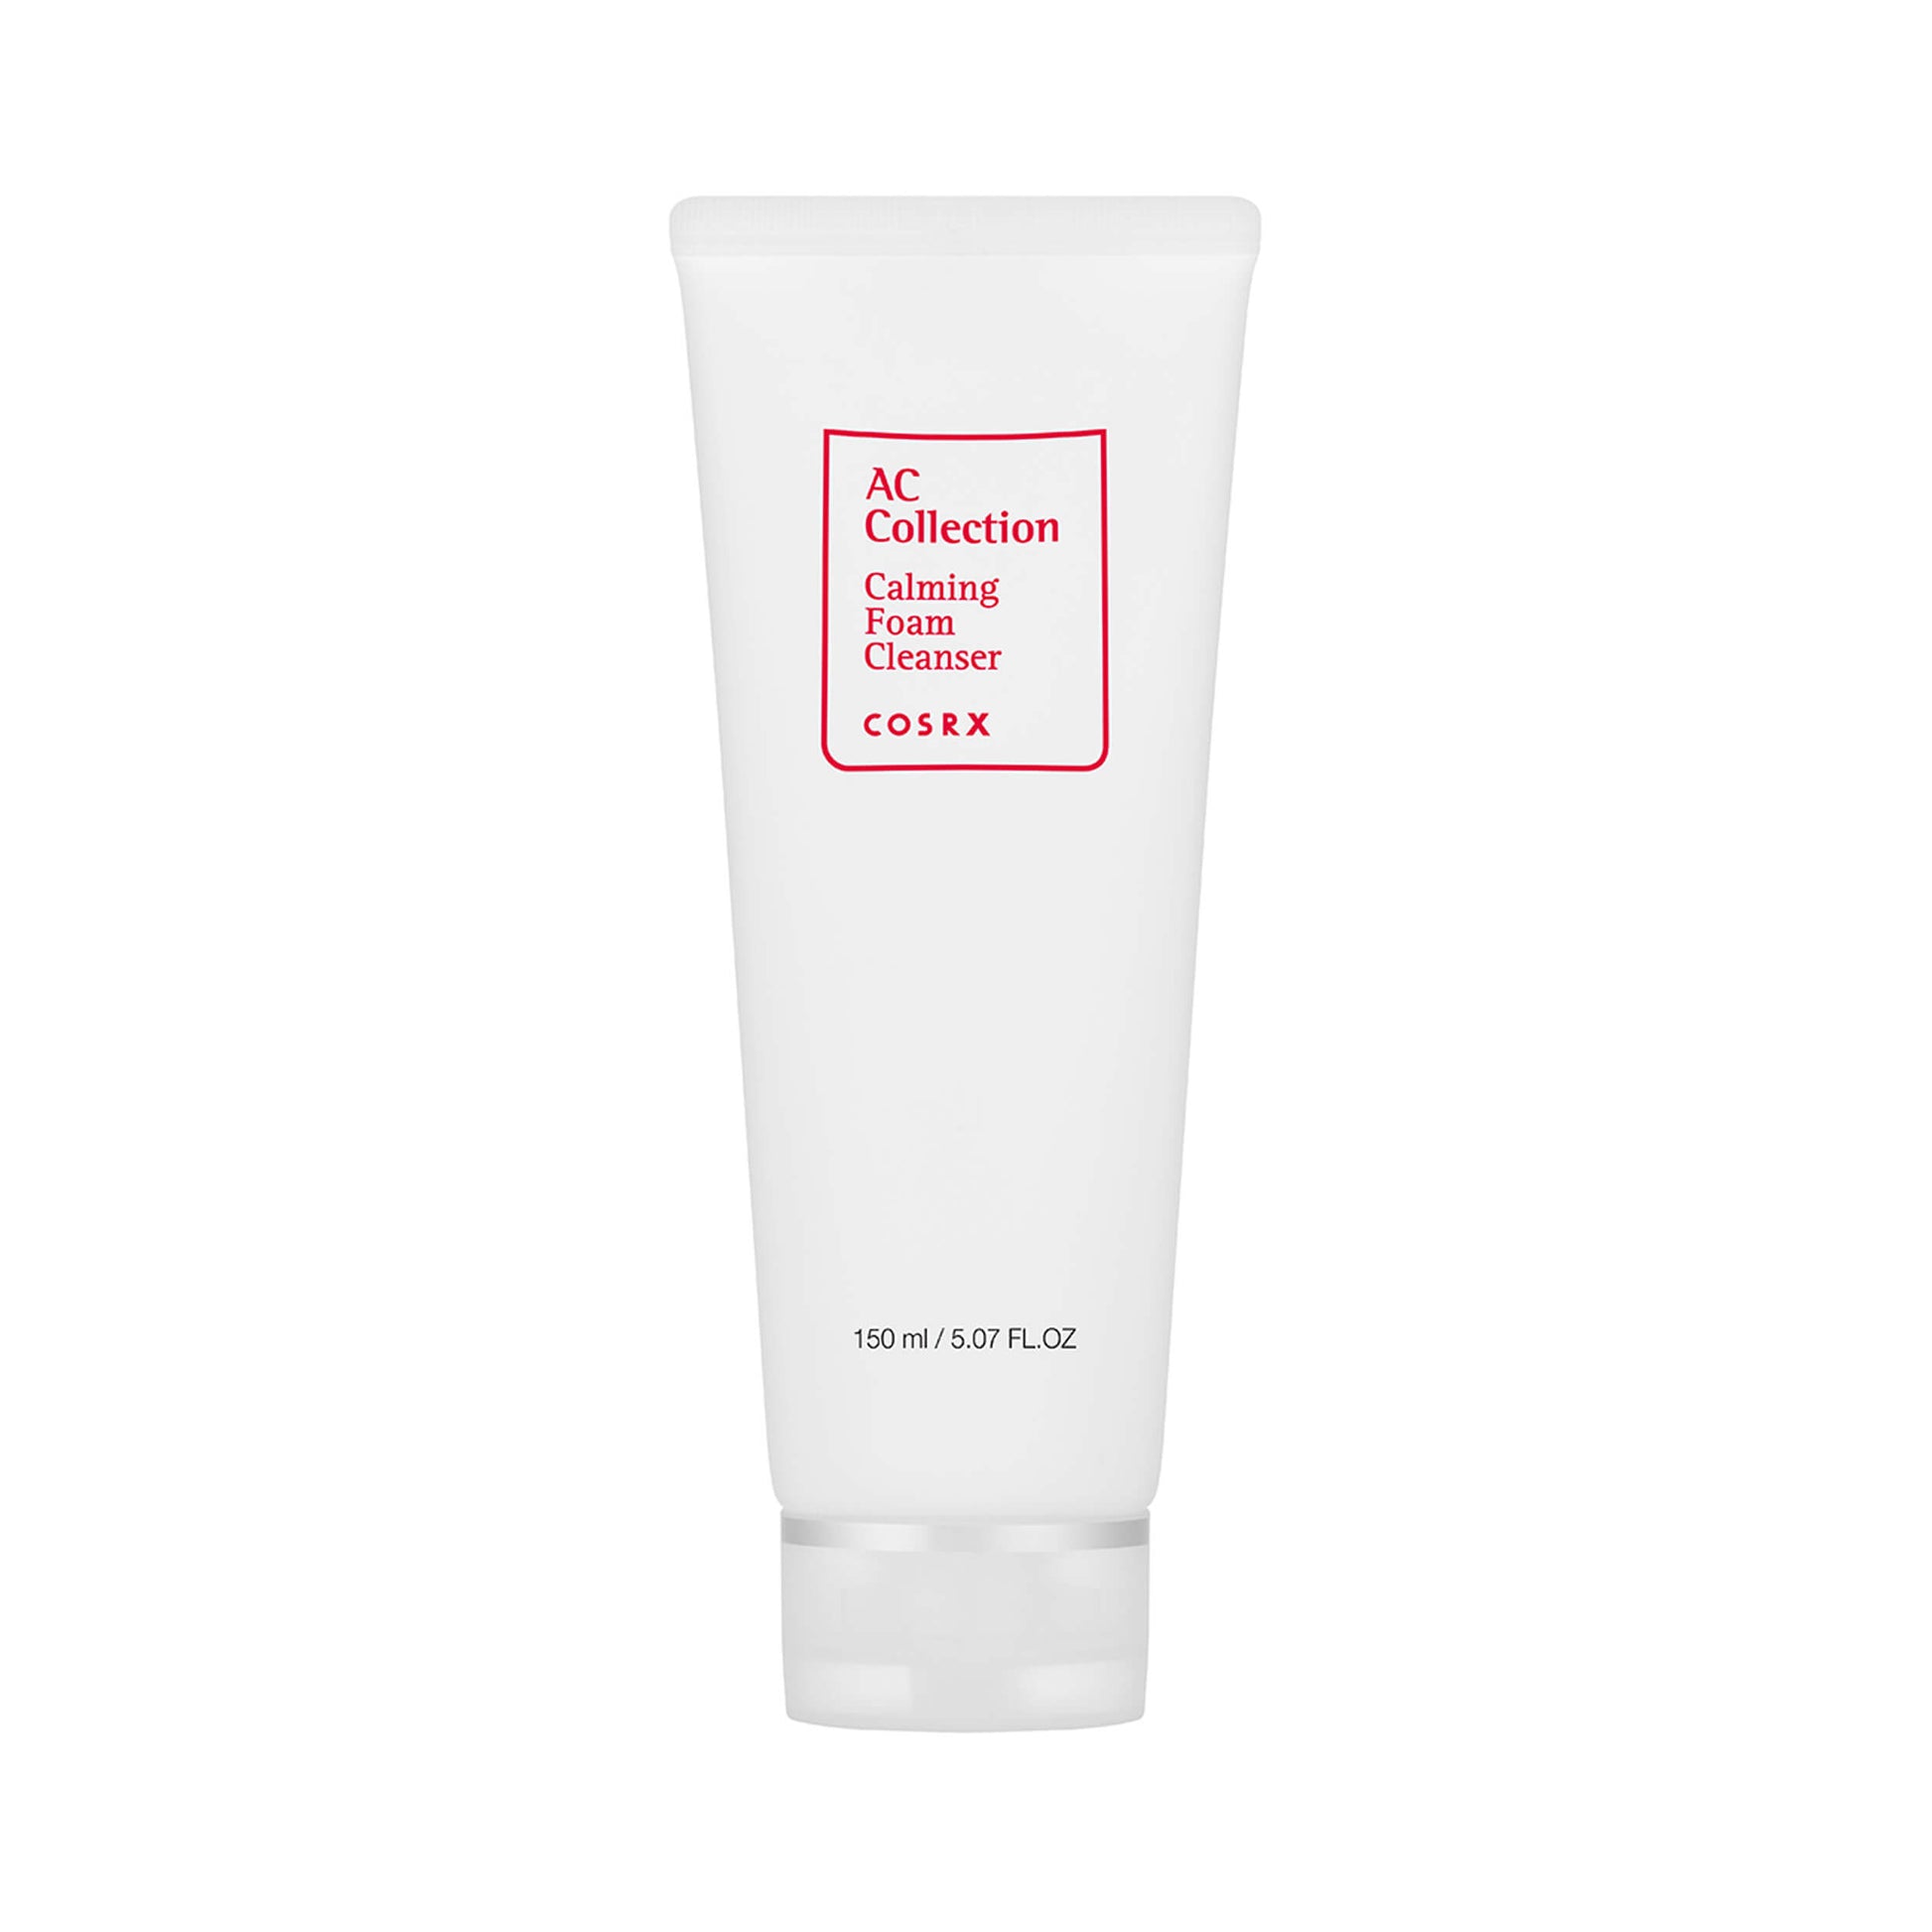 Cosrx AC Collection Calming Foam Cleanser 150 mL